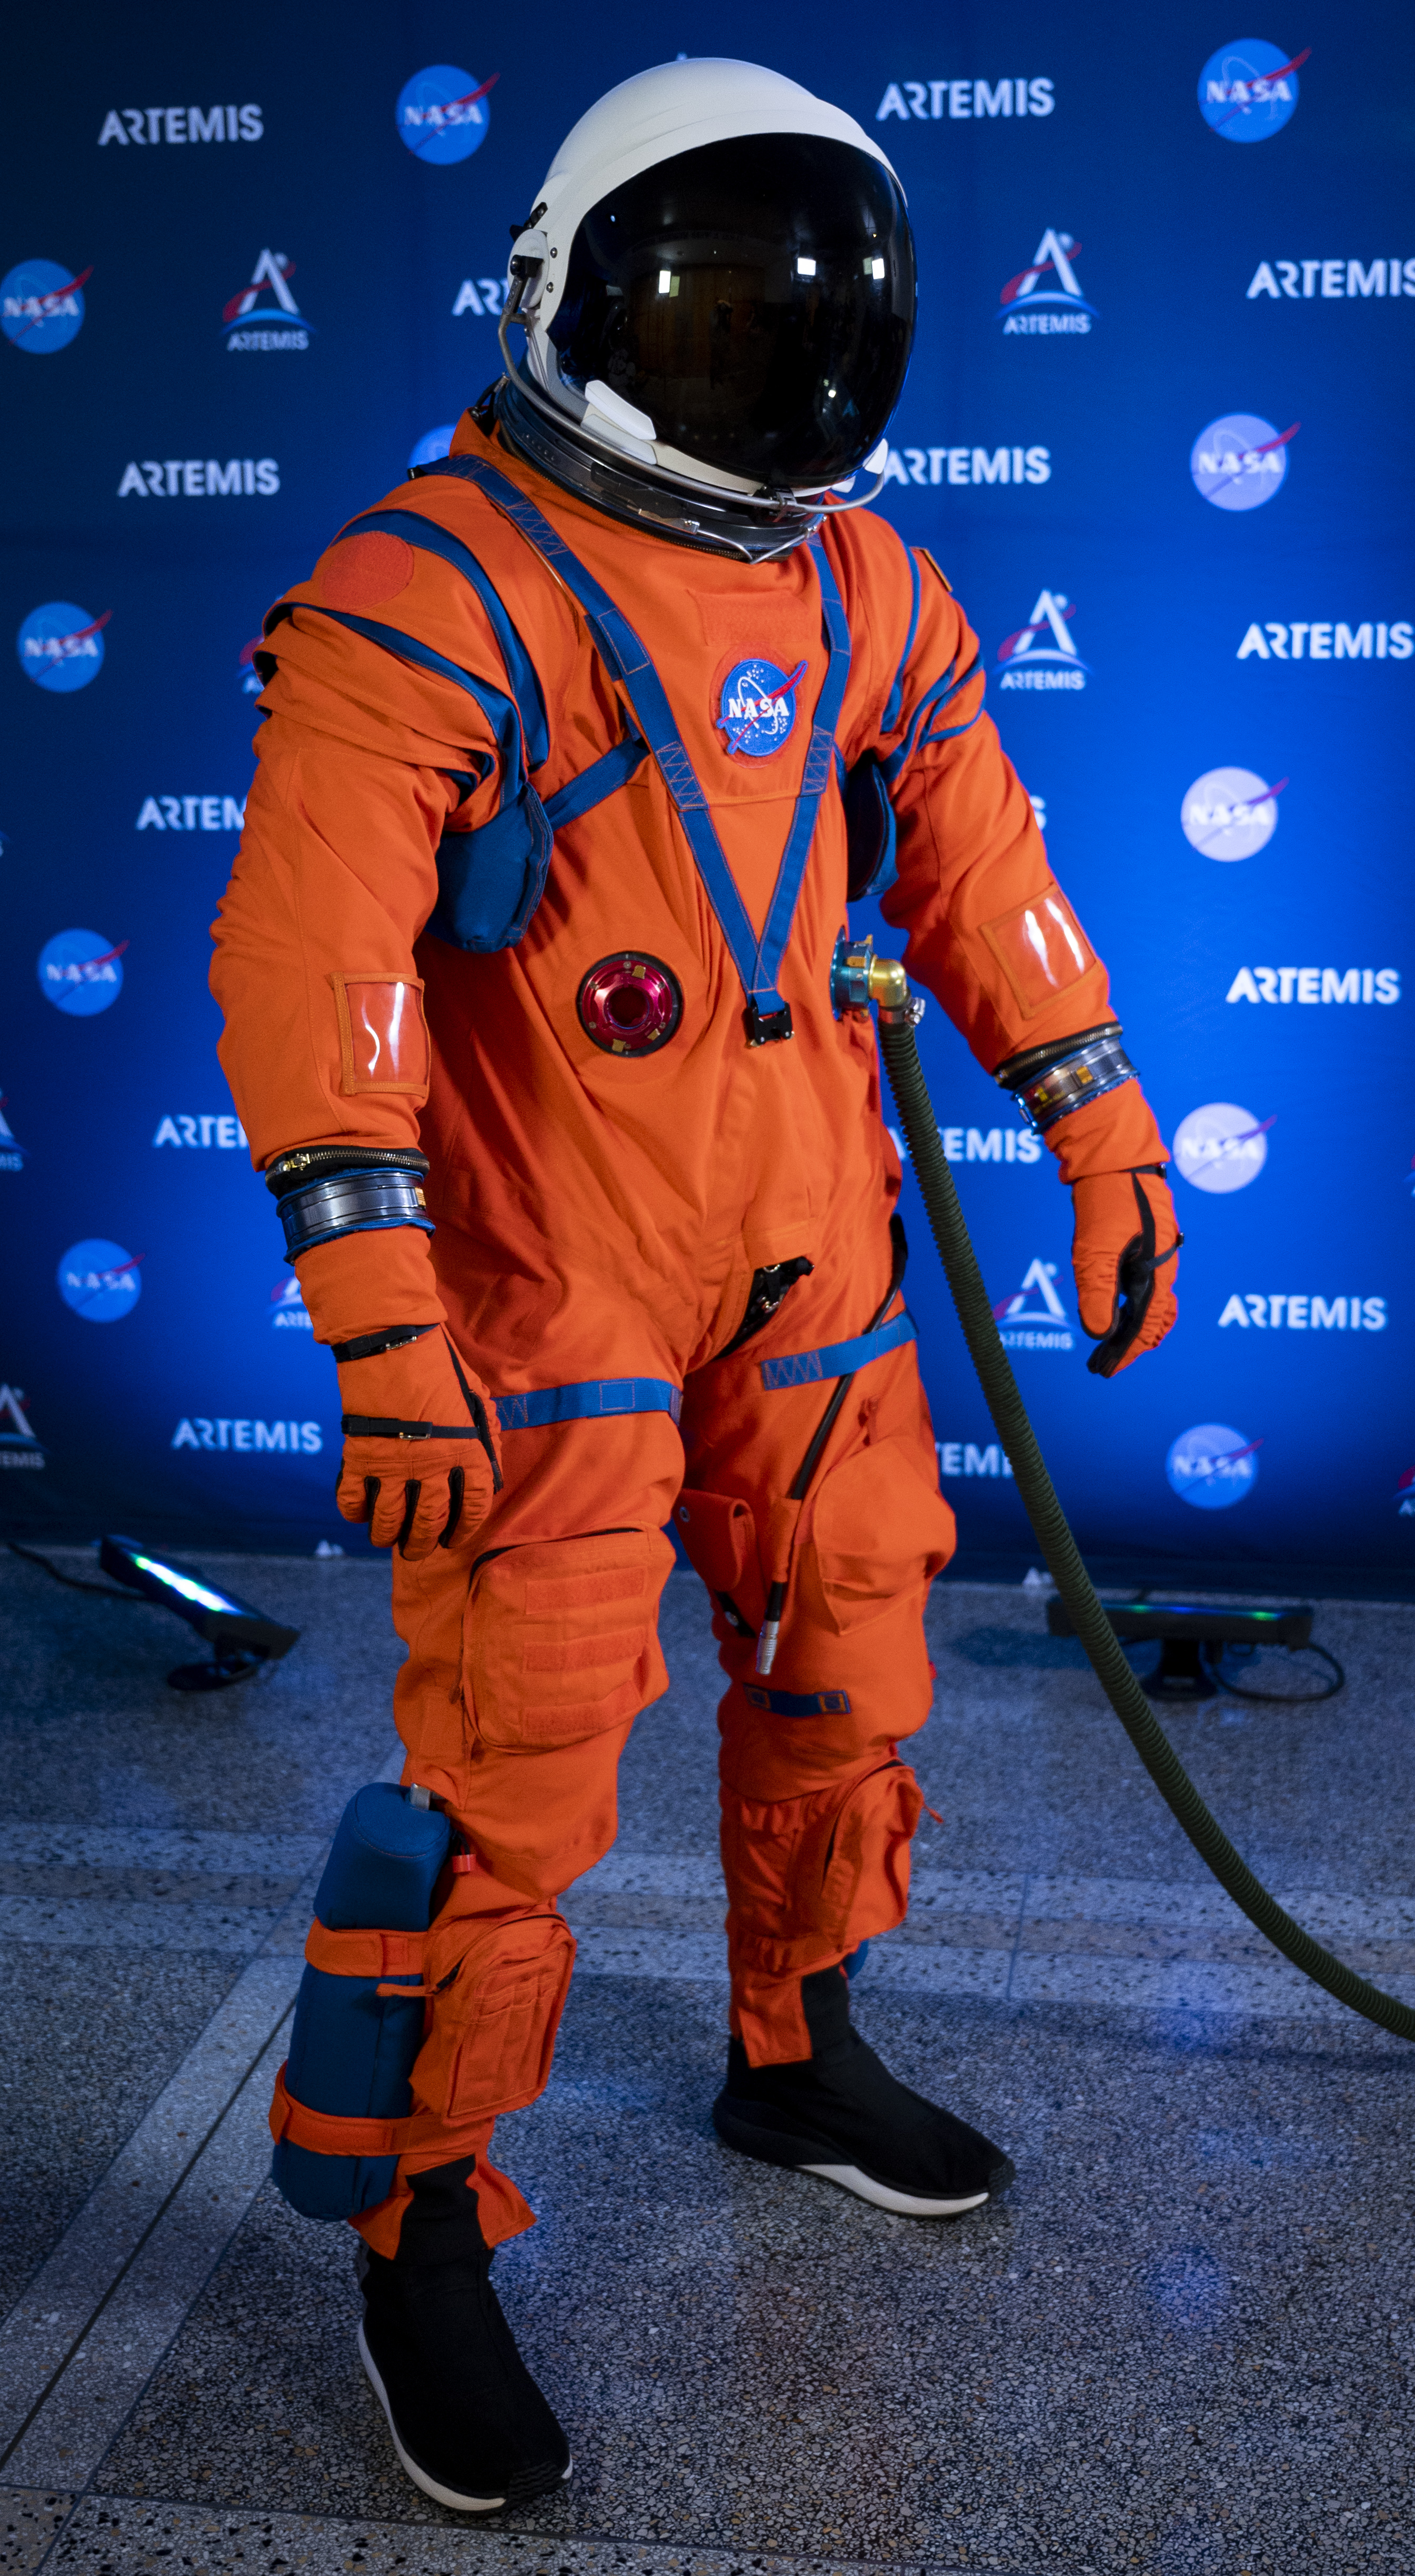 Orion Suit Equipped to Expect the Unexpected on Artemis Missions - NASA